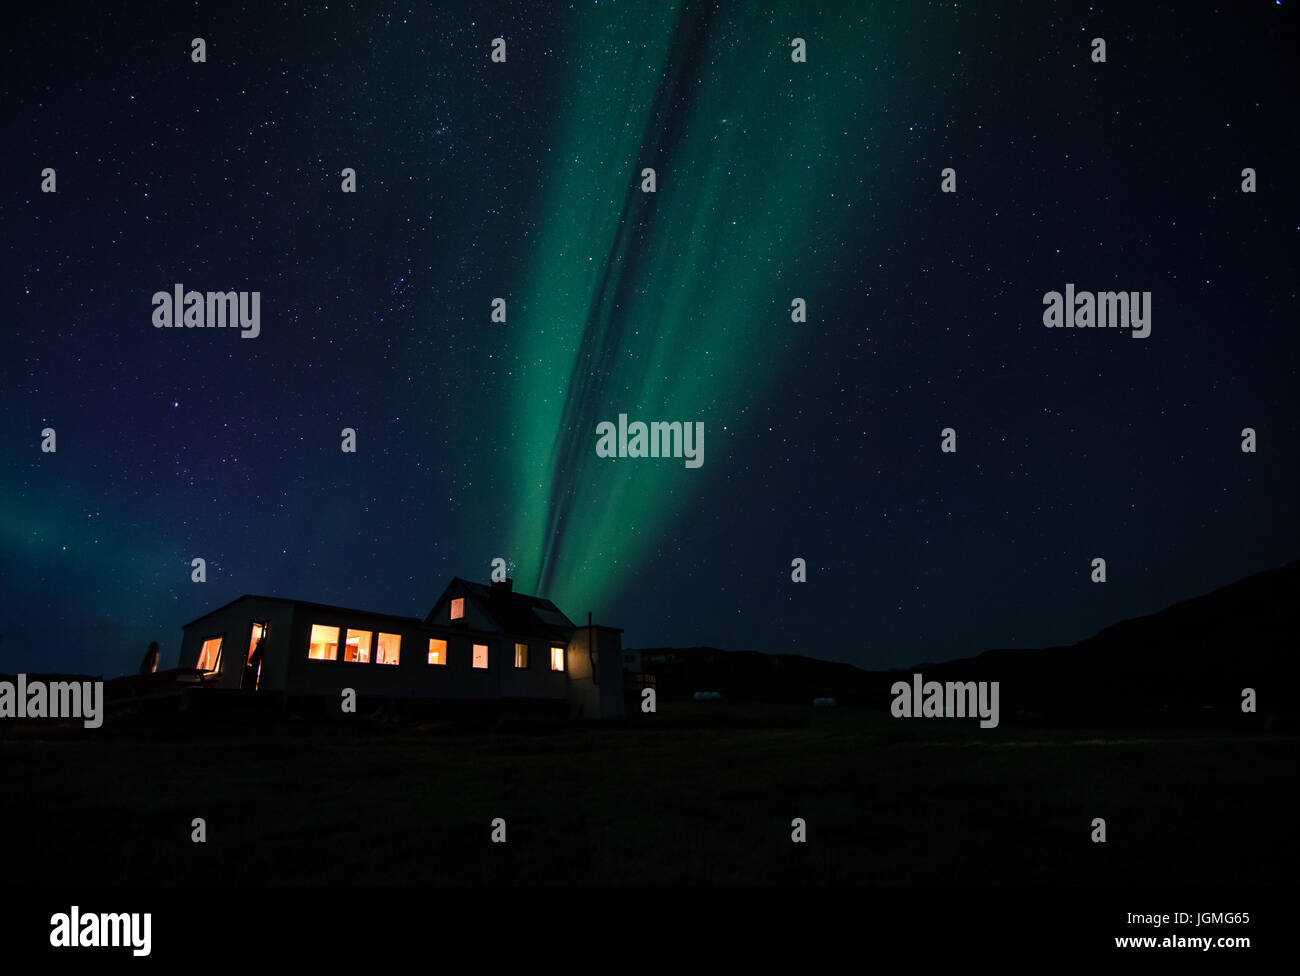 Northern lights at night over a farm house, Greenland Stock Photo